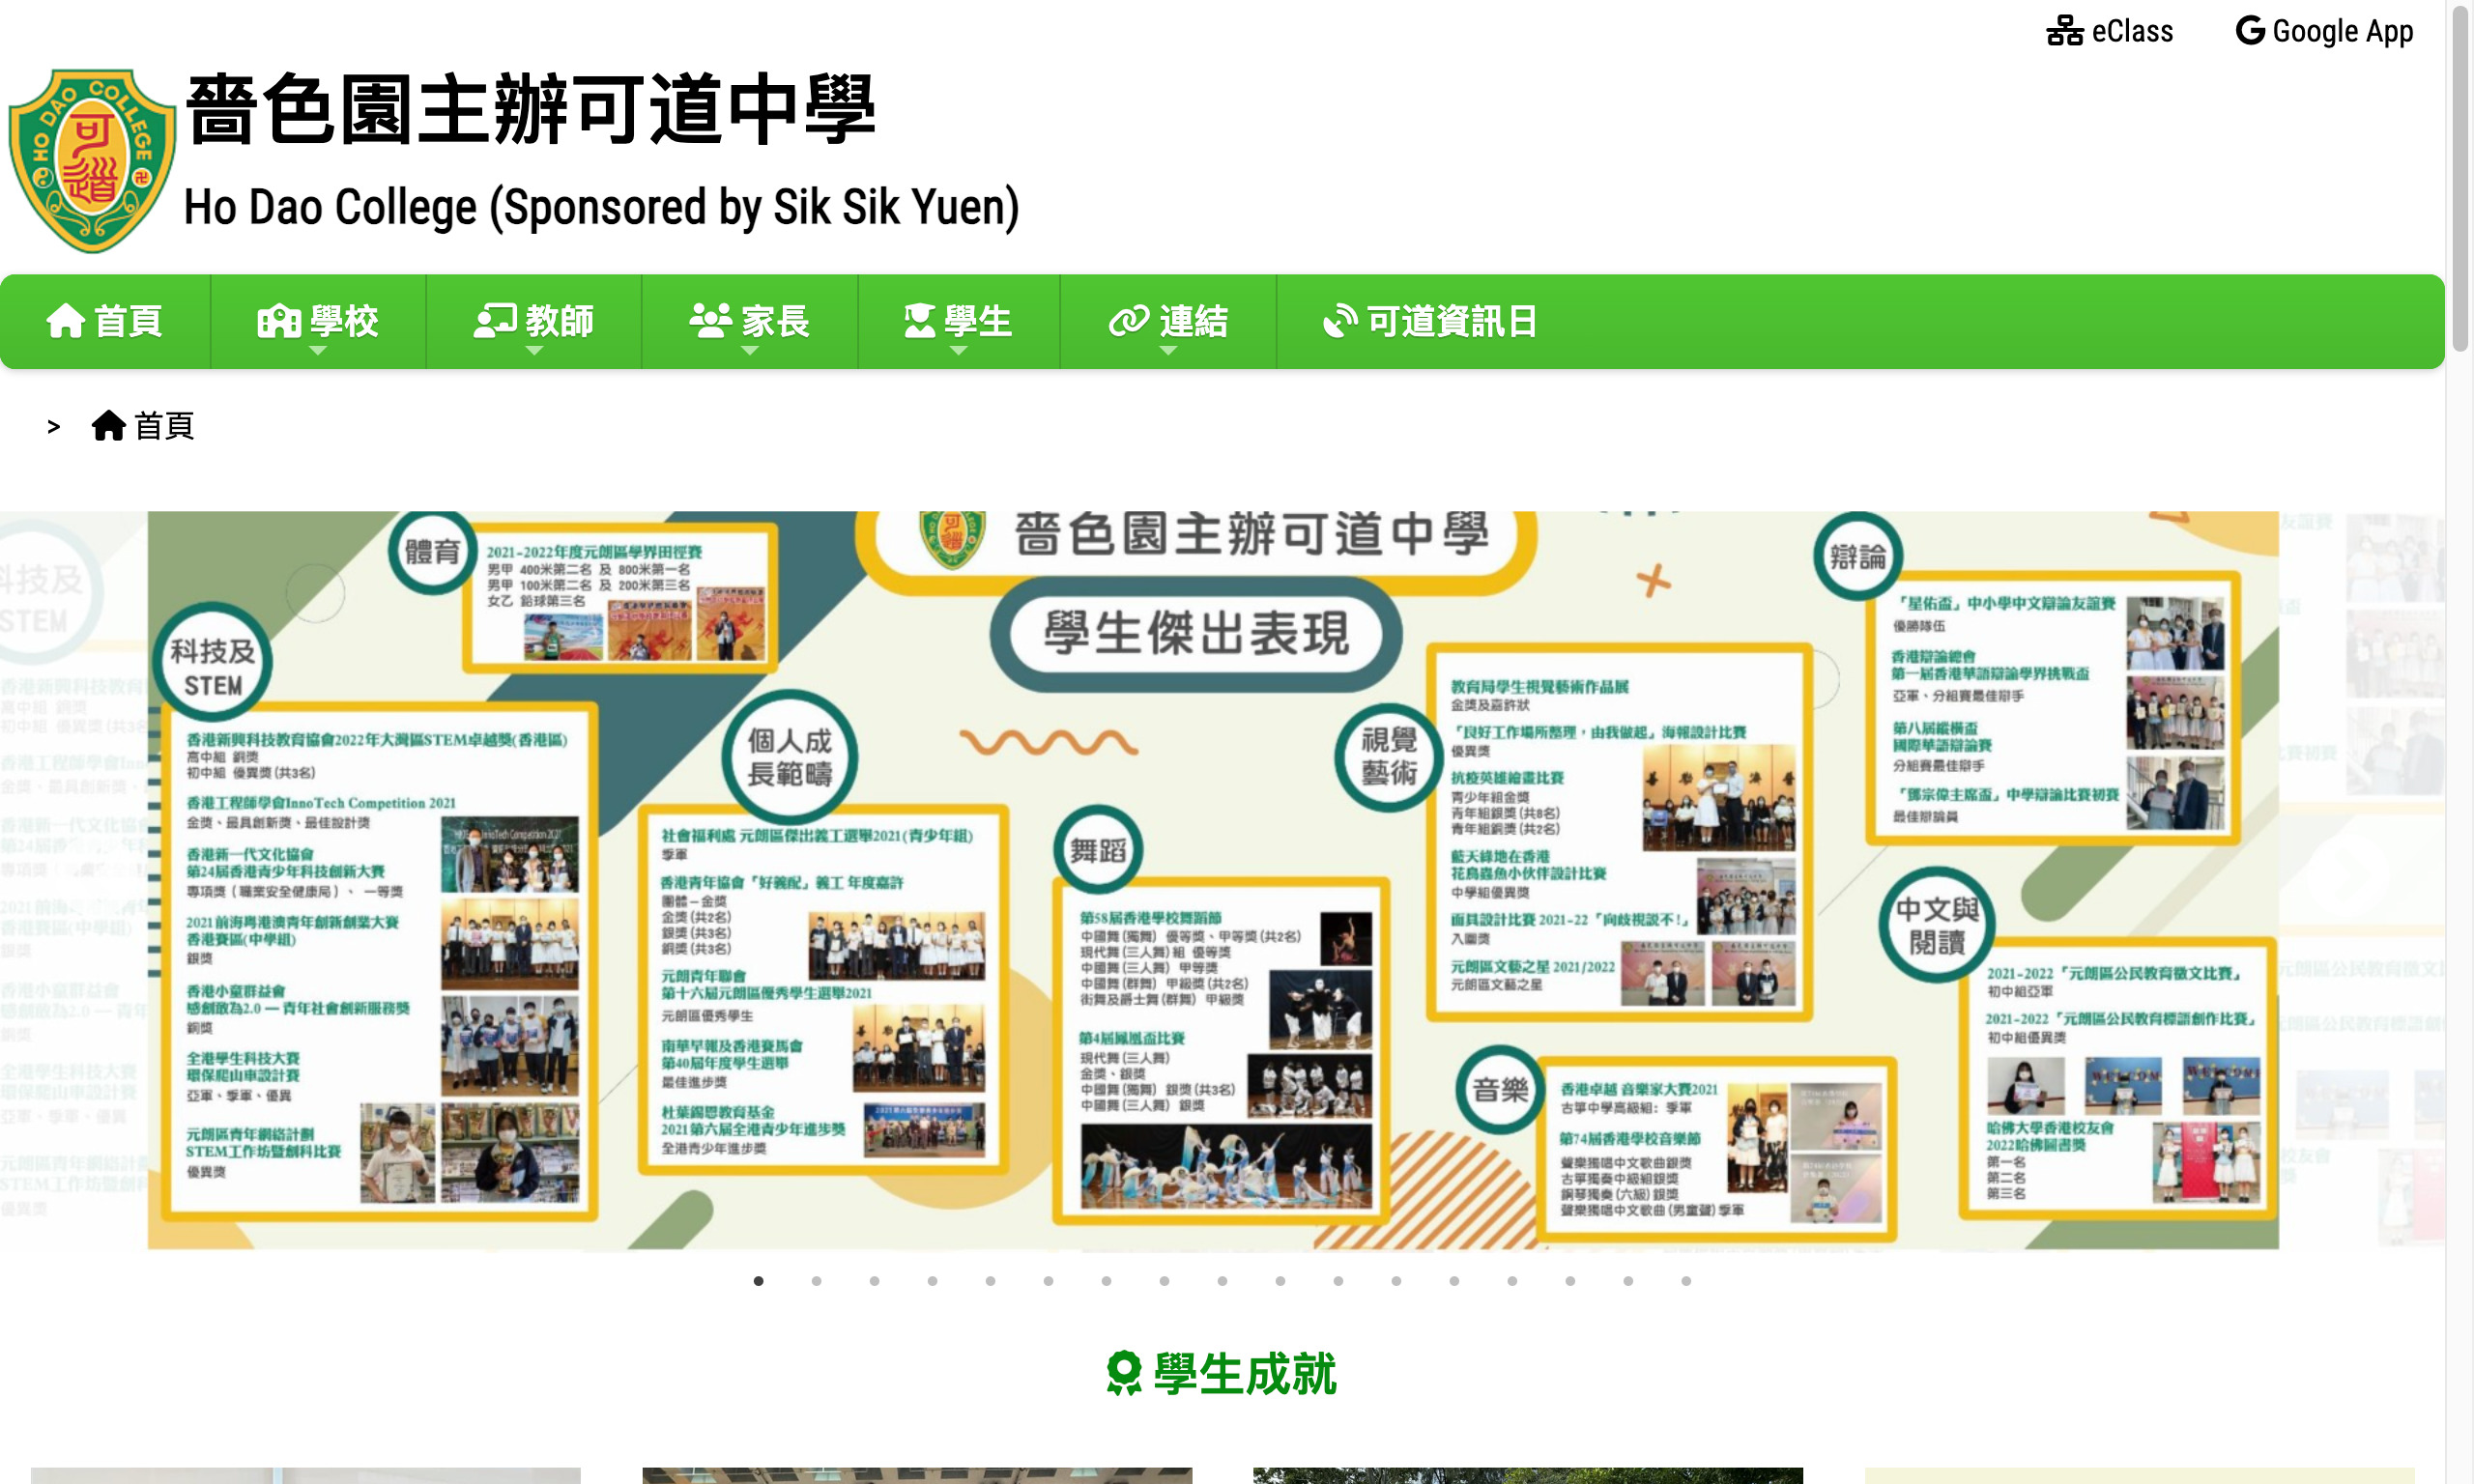 Screenshot of the Home Page of Ho Dao College (Sponsored by Sik Sik Yuen)